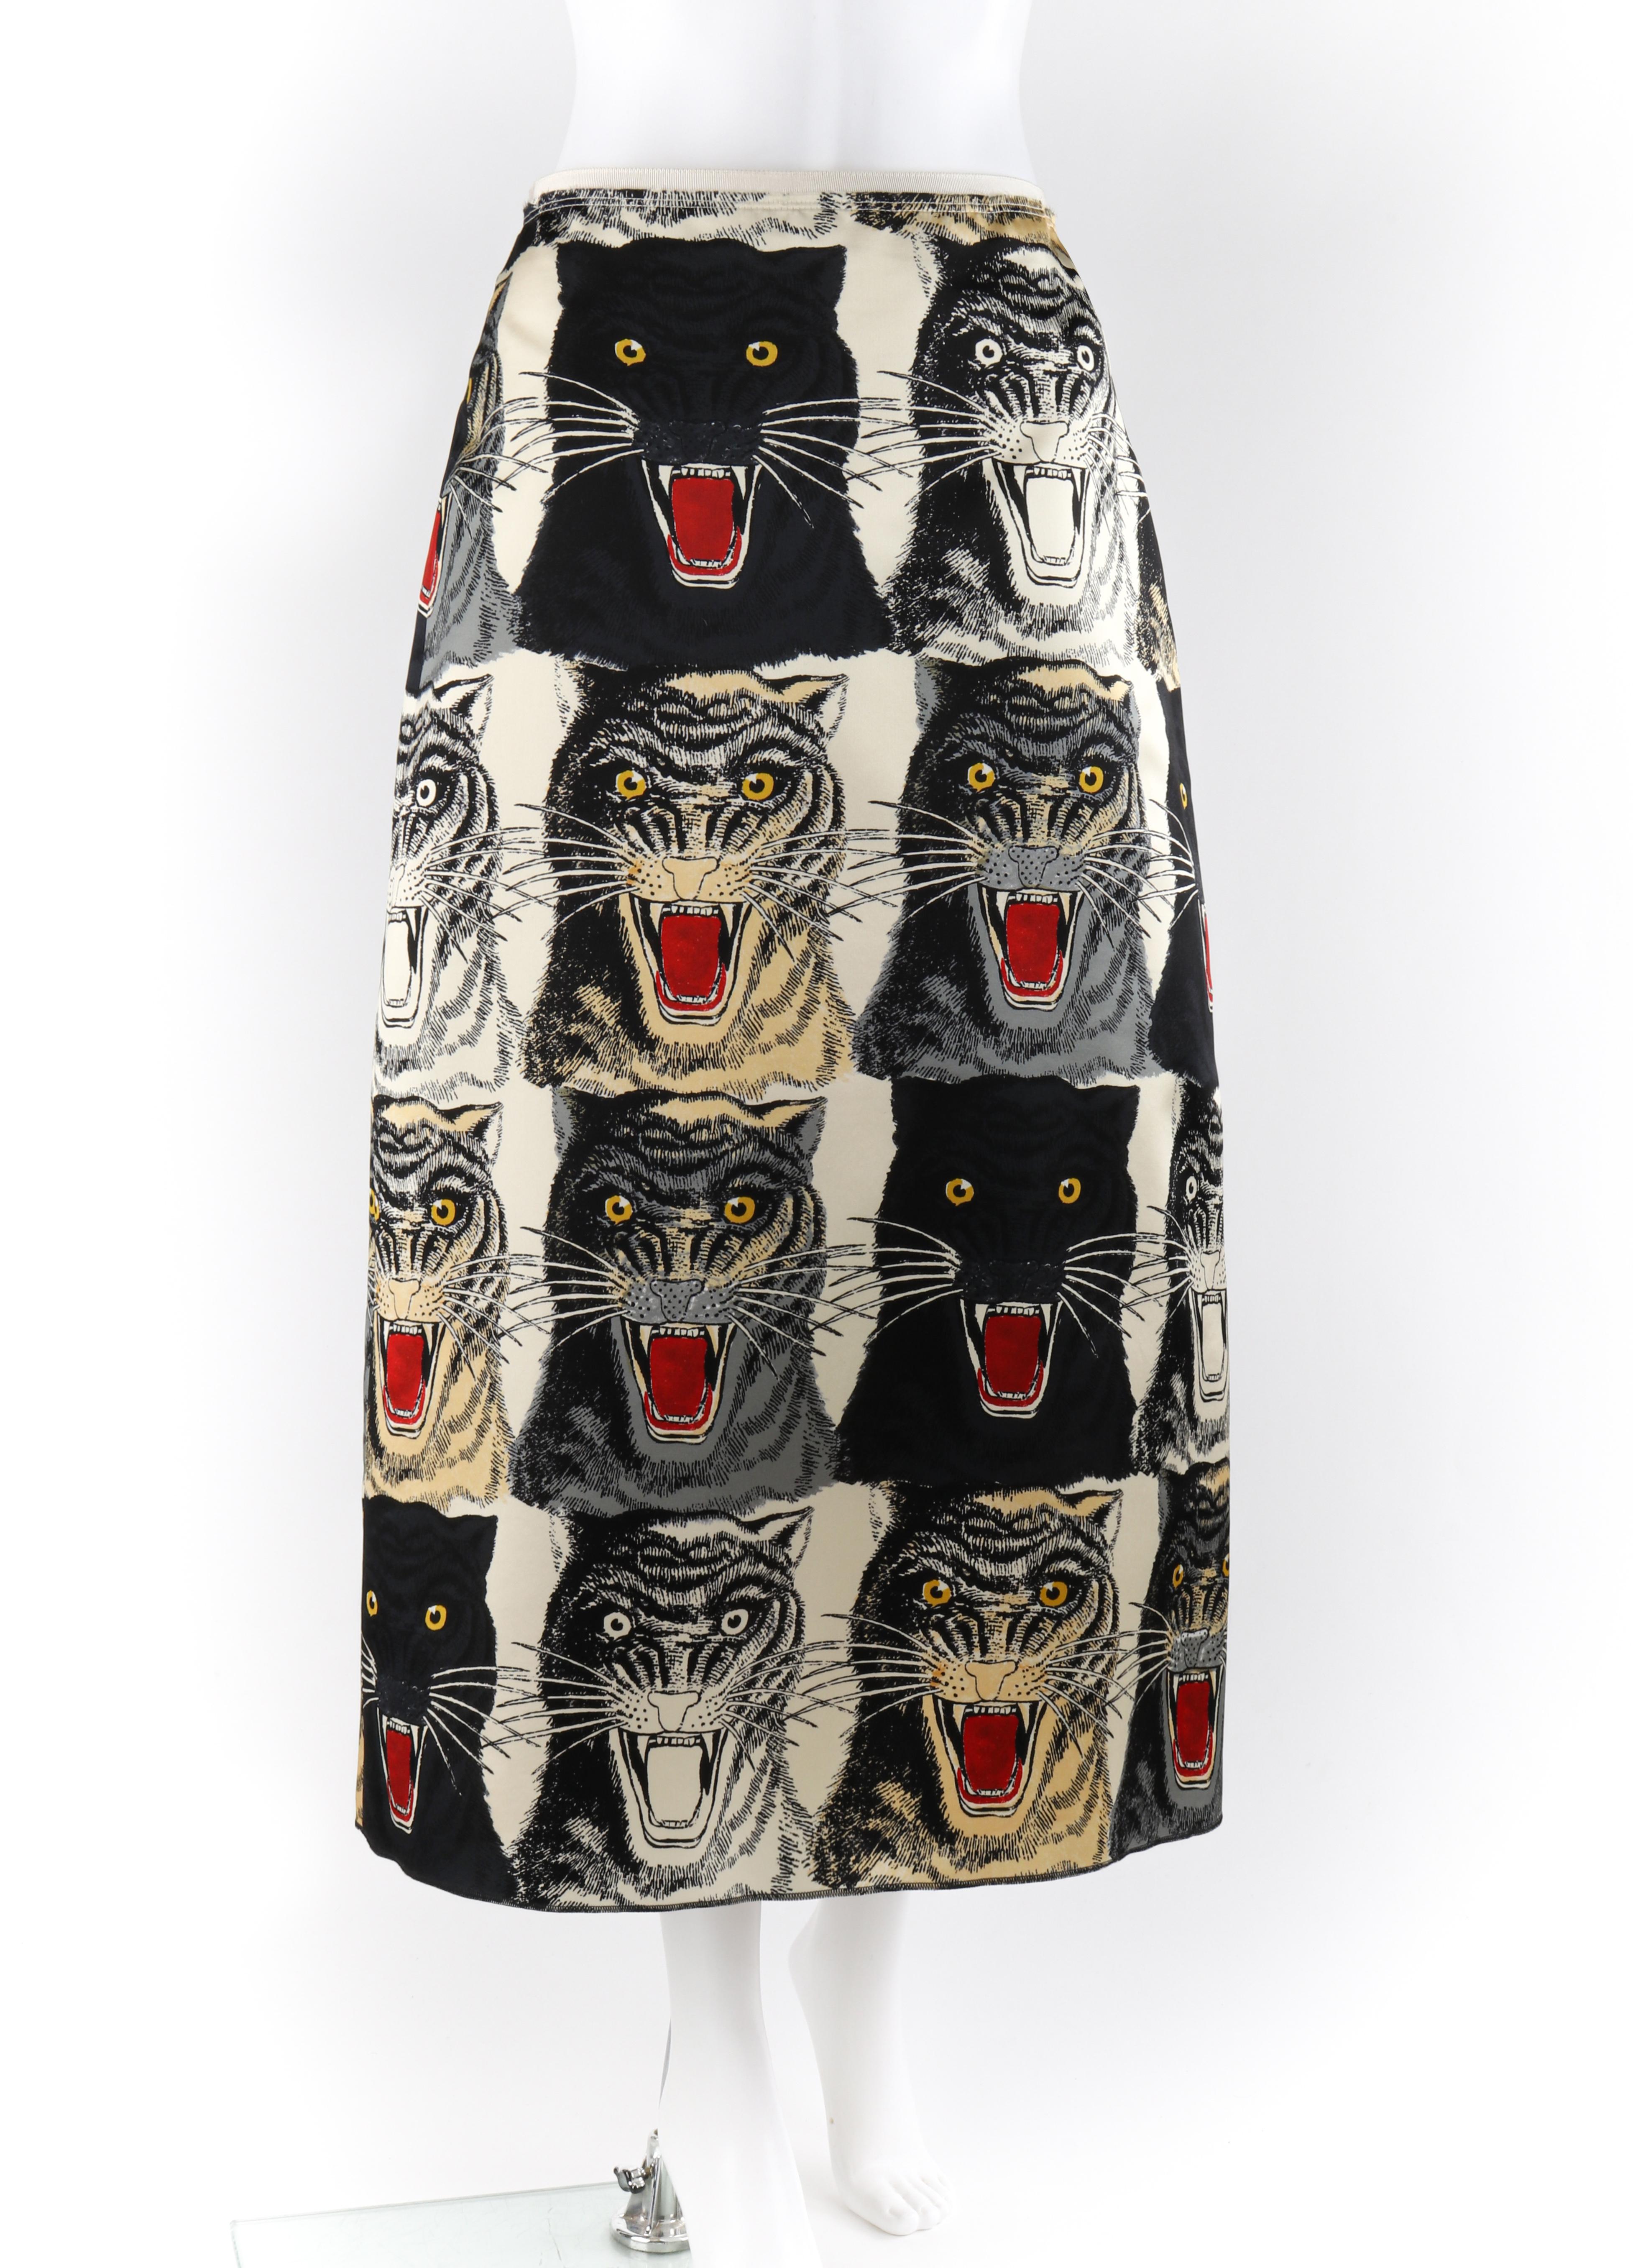 GUCCI Cream & Black Tiger Face Silk High Waist A-Line Midi Skirt NWT (New with Tags)
 
Estimated Retail: $1980.00
 
Brand / Manufacturer: Gucci
Designer: Alessandro Michele
Style: A-line midi skirt
Color(s): Shades of black, gray, cream, red, and